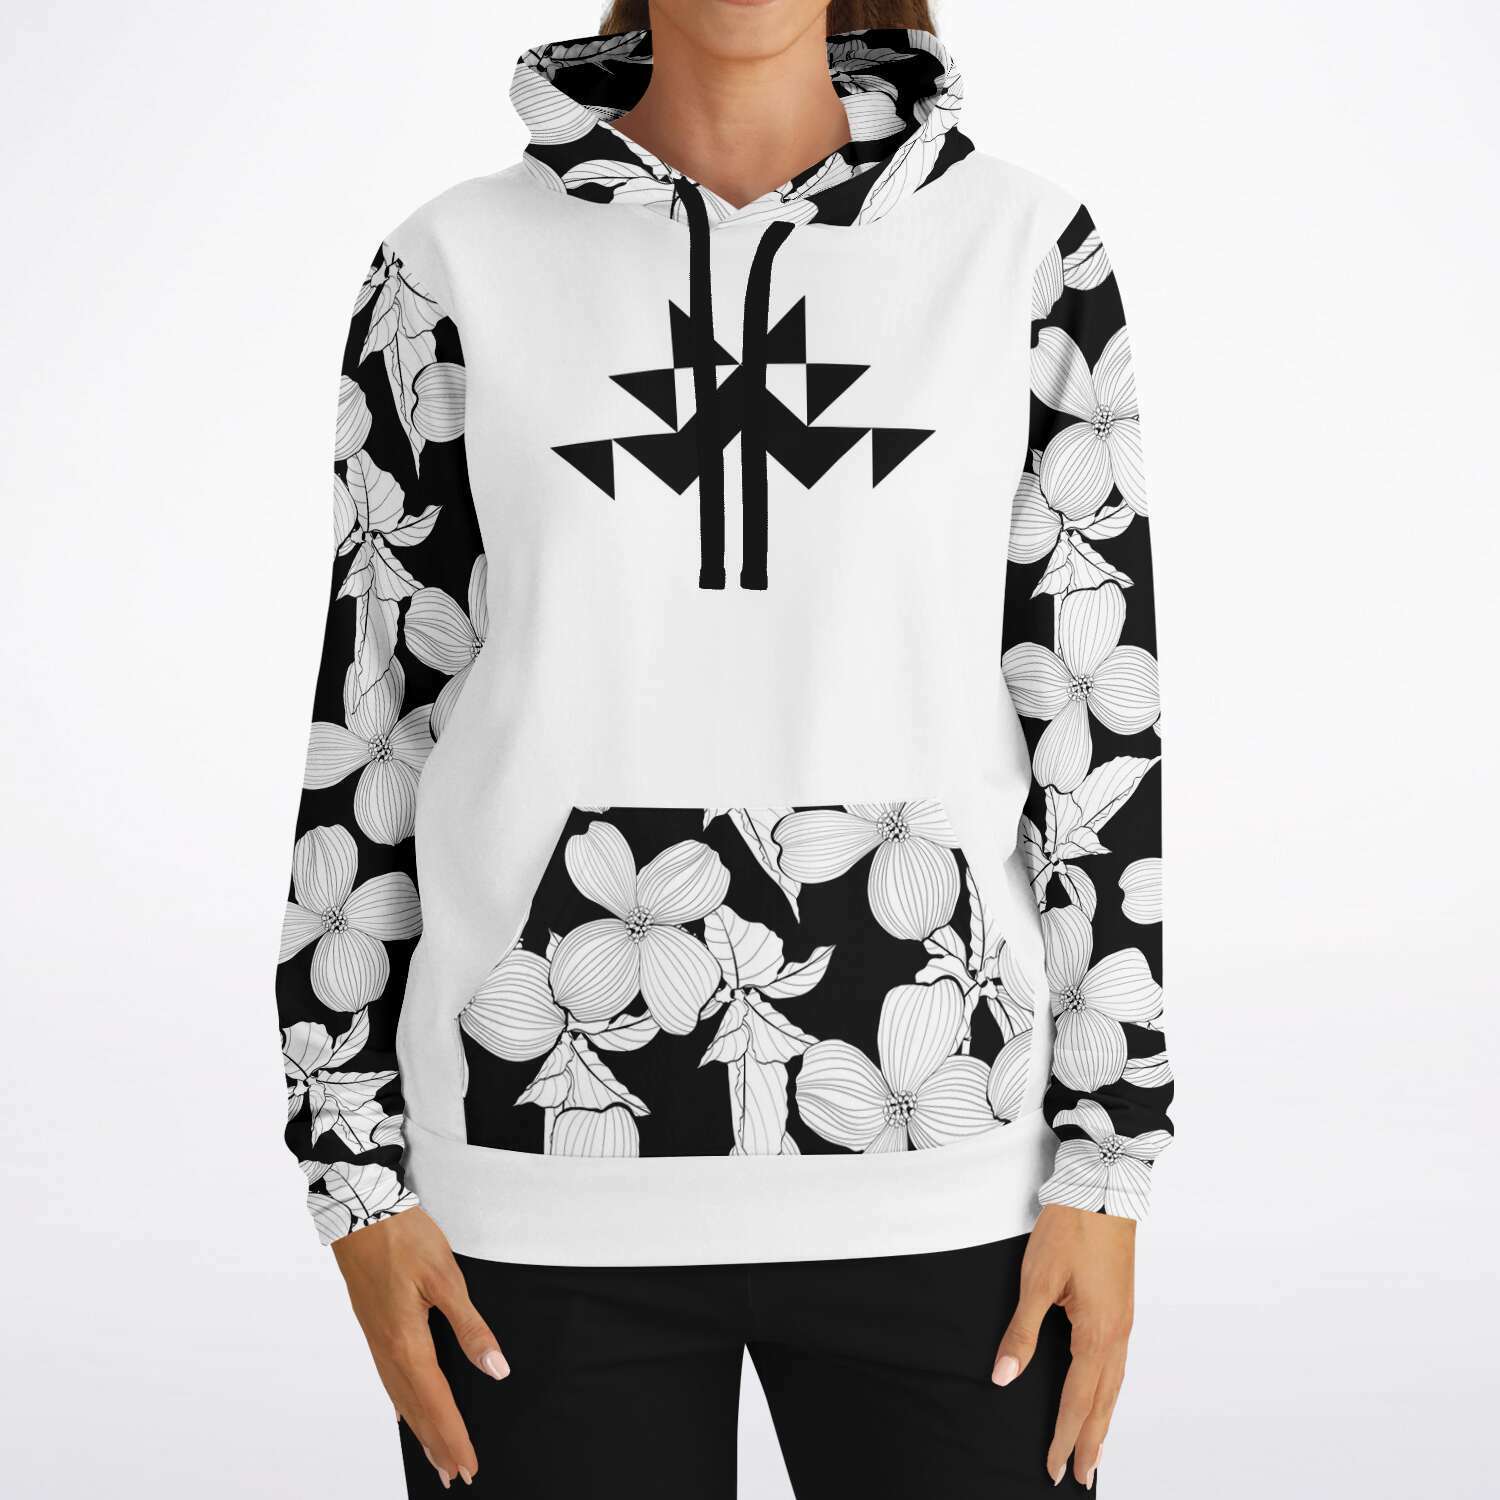 Unisex Athletic Hoodie With Dogwood Flower Pattern/Butterfly Design